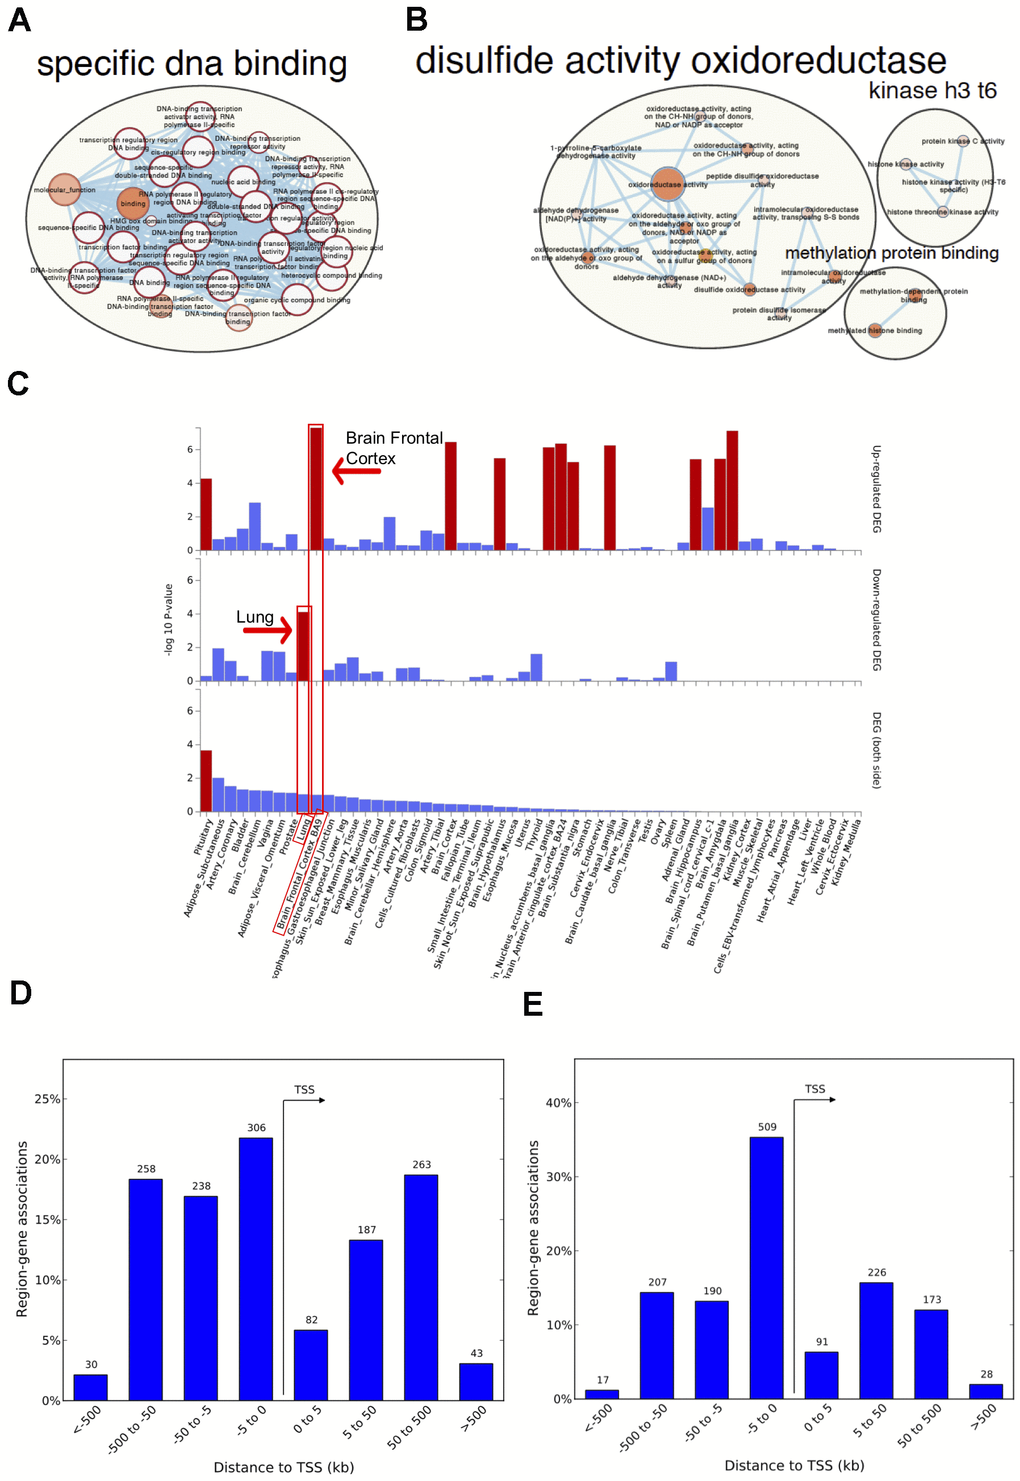 Network visualization, functional enrichment and region-gene associations in both fetal and adult lung tissue datasets. Network clusters of the molecular function gene ontology terms and annotated pathways including reactome and wikiPathways were created using the gene symbols mapped to the significant and age-associated differentially methylated positions (DMPs) overlapping between fetal and adult lung datasets. (A) Hyper-methylated CpGs were mainly enriched in transcription factor DNA binding whereas (B) hypo-methylated CpGs were enriched in oxidoreductase activity. Size corresponds to the overlap of genes between the enriched terms and color corresponds to significance. The analysis for hypo-methylated CpGs was limited by few numbers of genes represented by few CpGs (C) Functional enrichment of age-associated hyper-methylated DMPs in both fetal and adult lung tissue datasets amongst differentially expressed genes in 54 GTEx tissues (x-axis) and –log10(P-value) on the y-axis. Tissues with significant gene enrichment (FDRD) Region-Gene associations using chromosomal coordinates for the differentially methylated regions in fetal lung dataset (E) Adult lung tissue dataset. TSS: transcription start site.